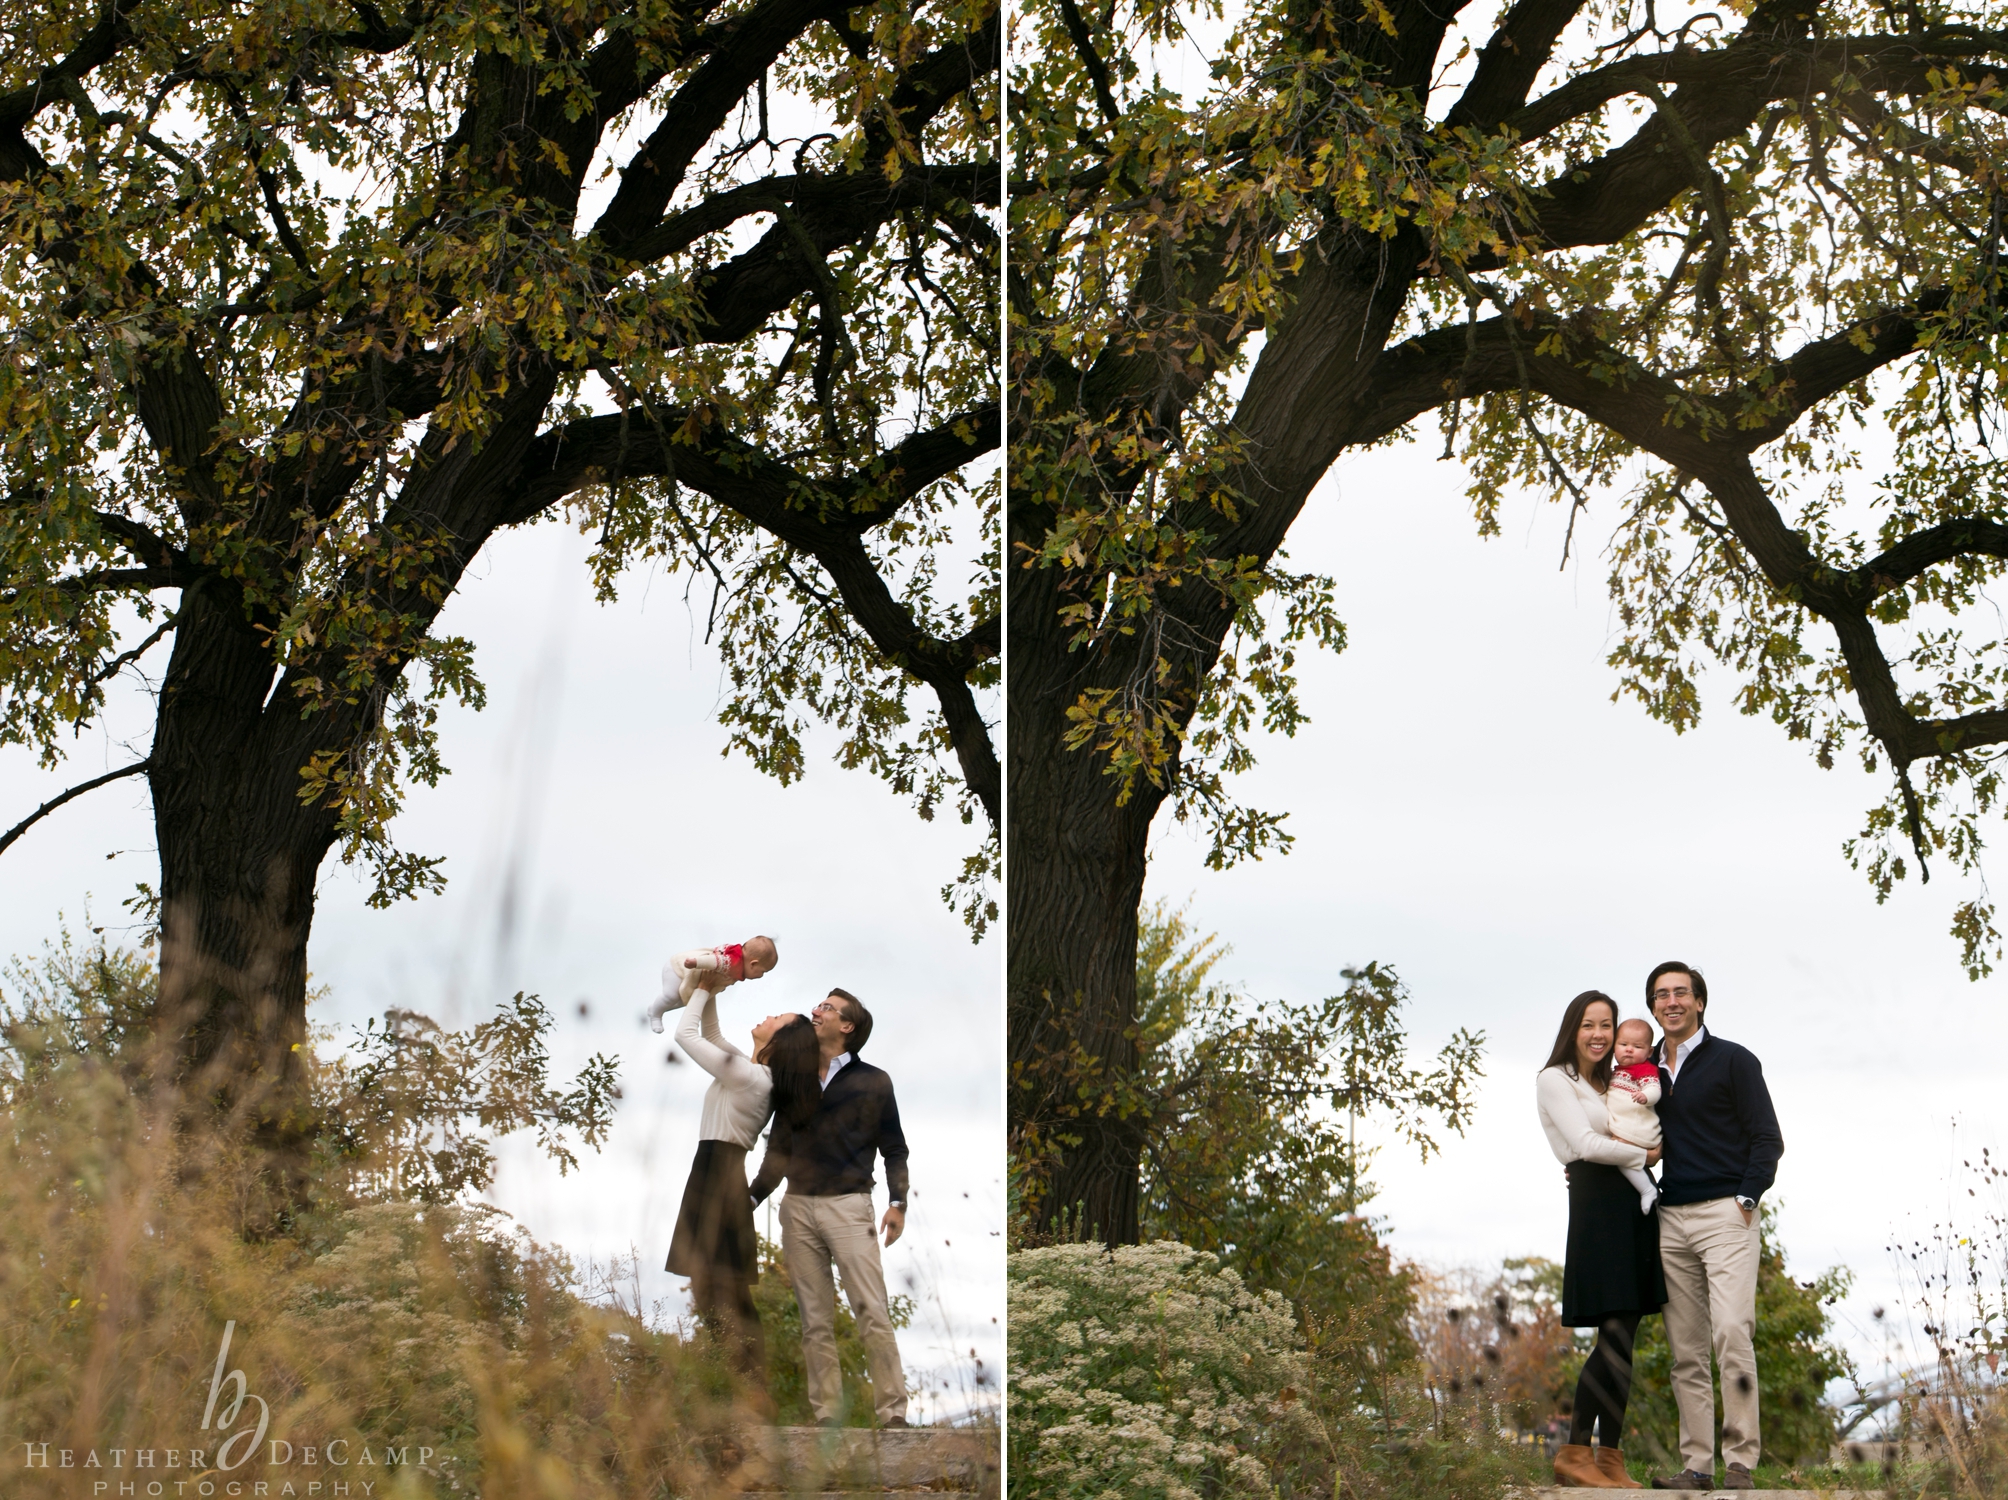 Heather DeCamp is a Chicago Family and newborn Photographer.  Chicago Fall Family photography at Lincoln Park